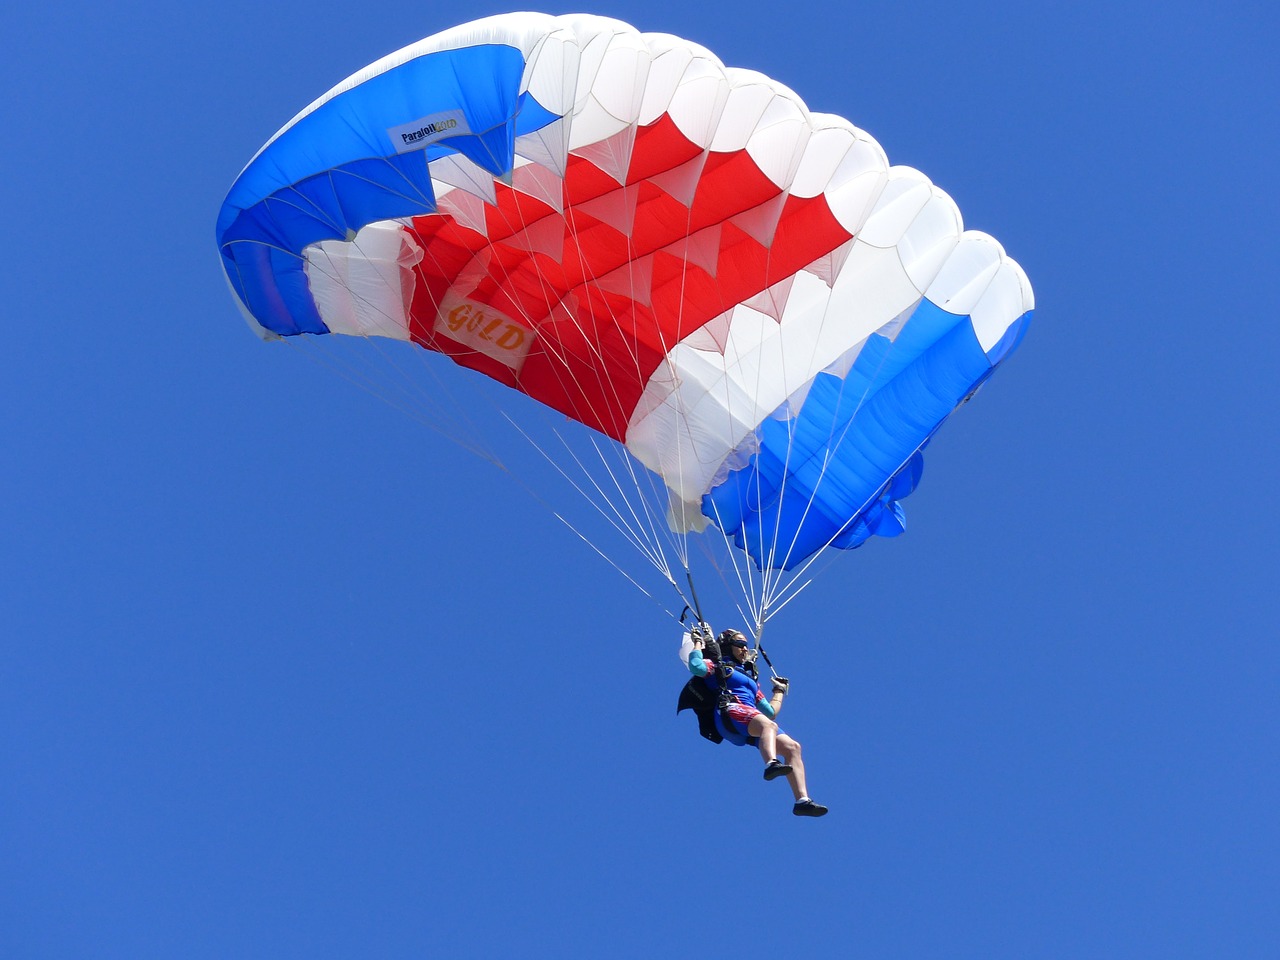 sport skydiving competition free photo